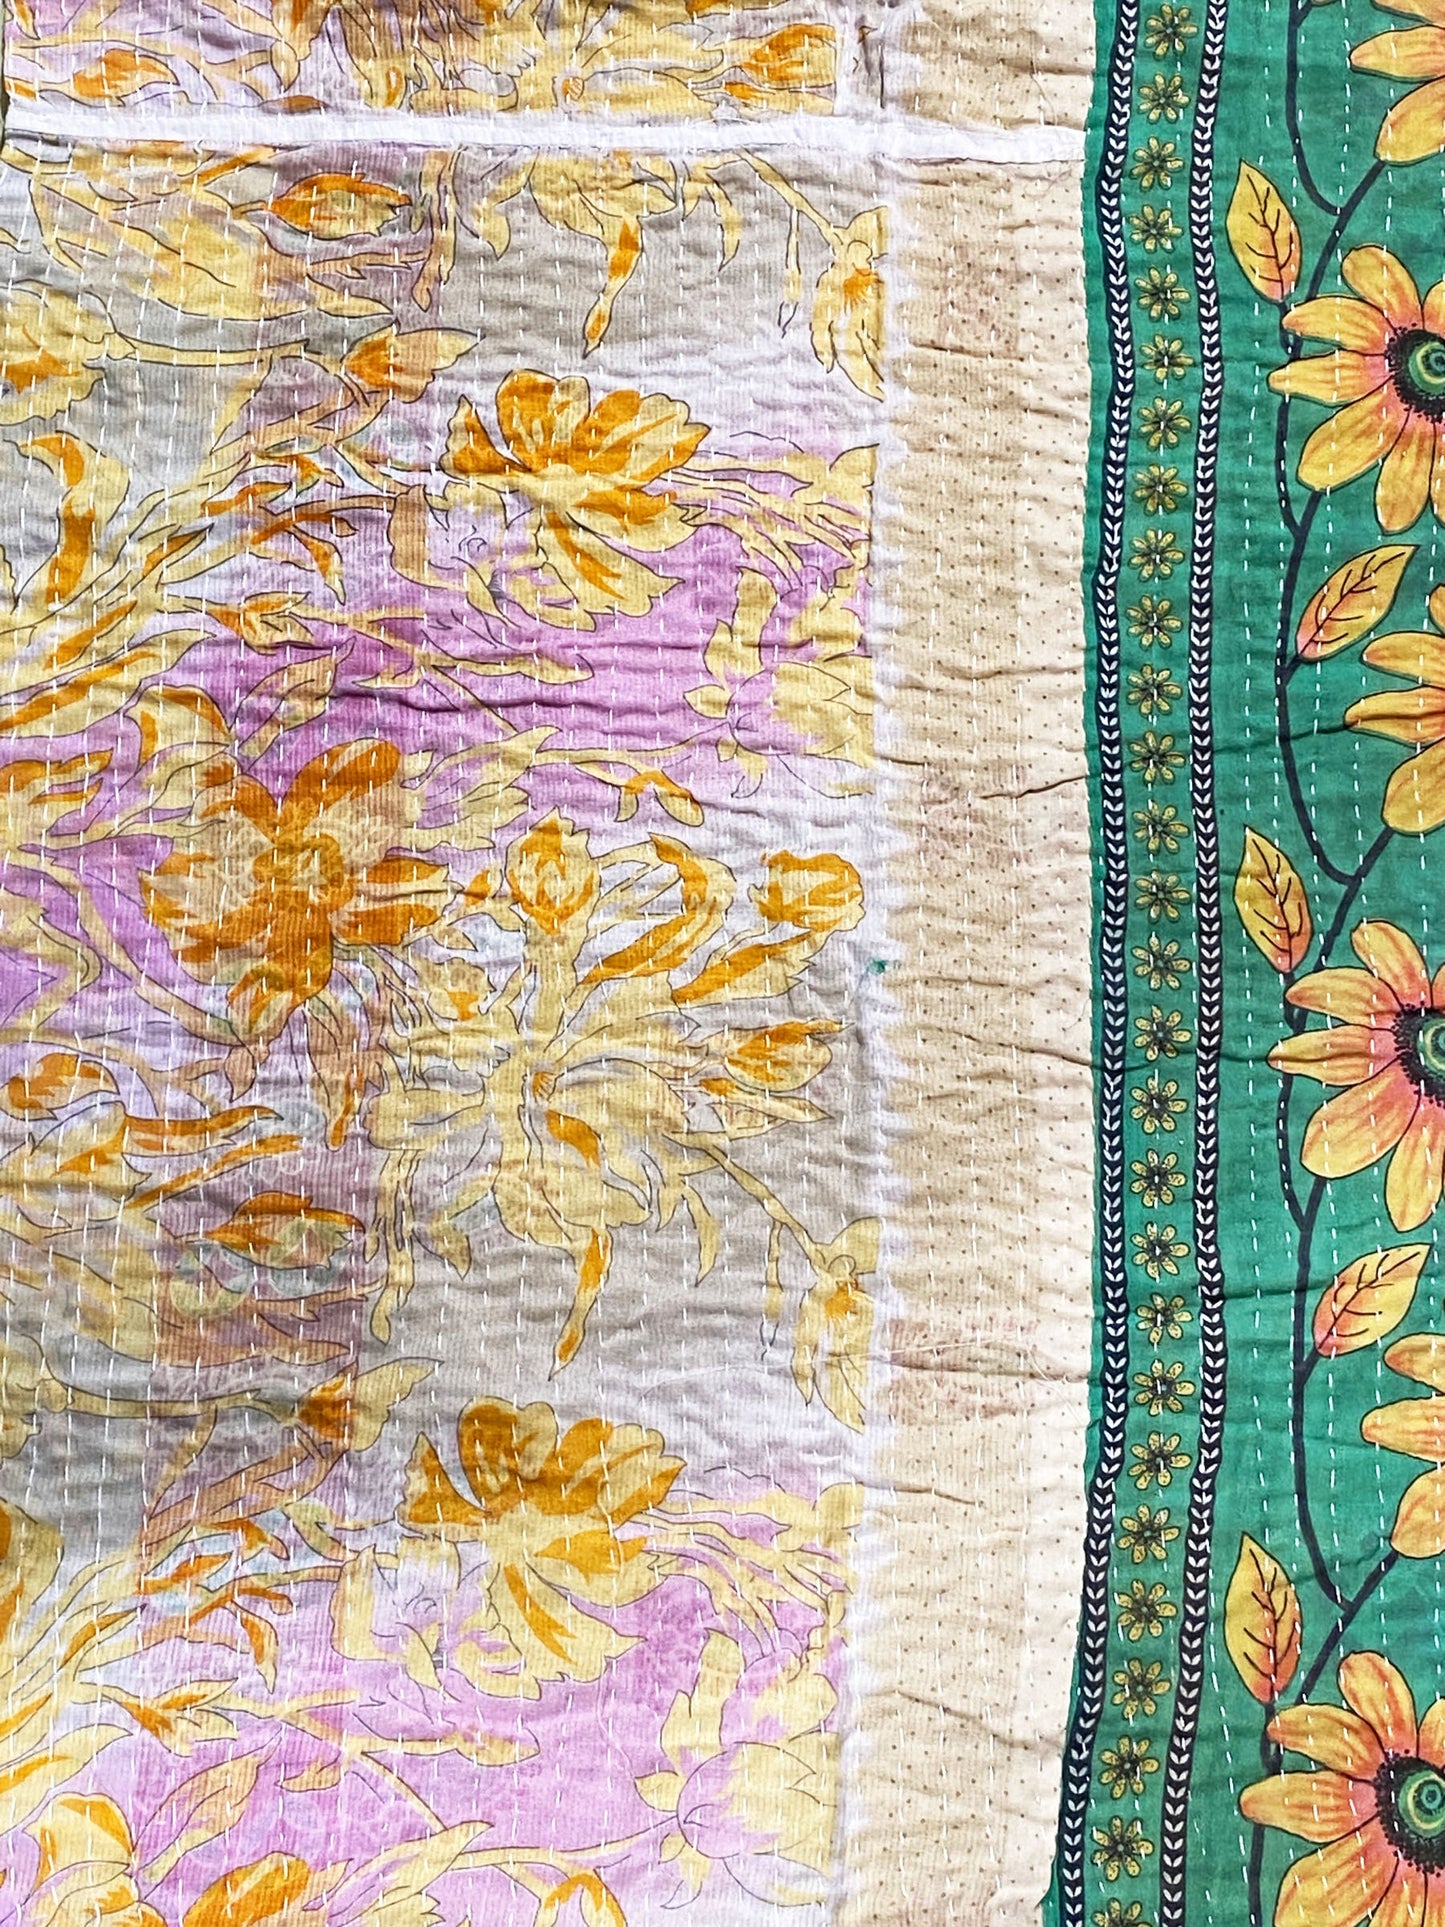 # 5324 Vintage Indian CottonThrow Kantha Quilt 89" by 56"